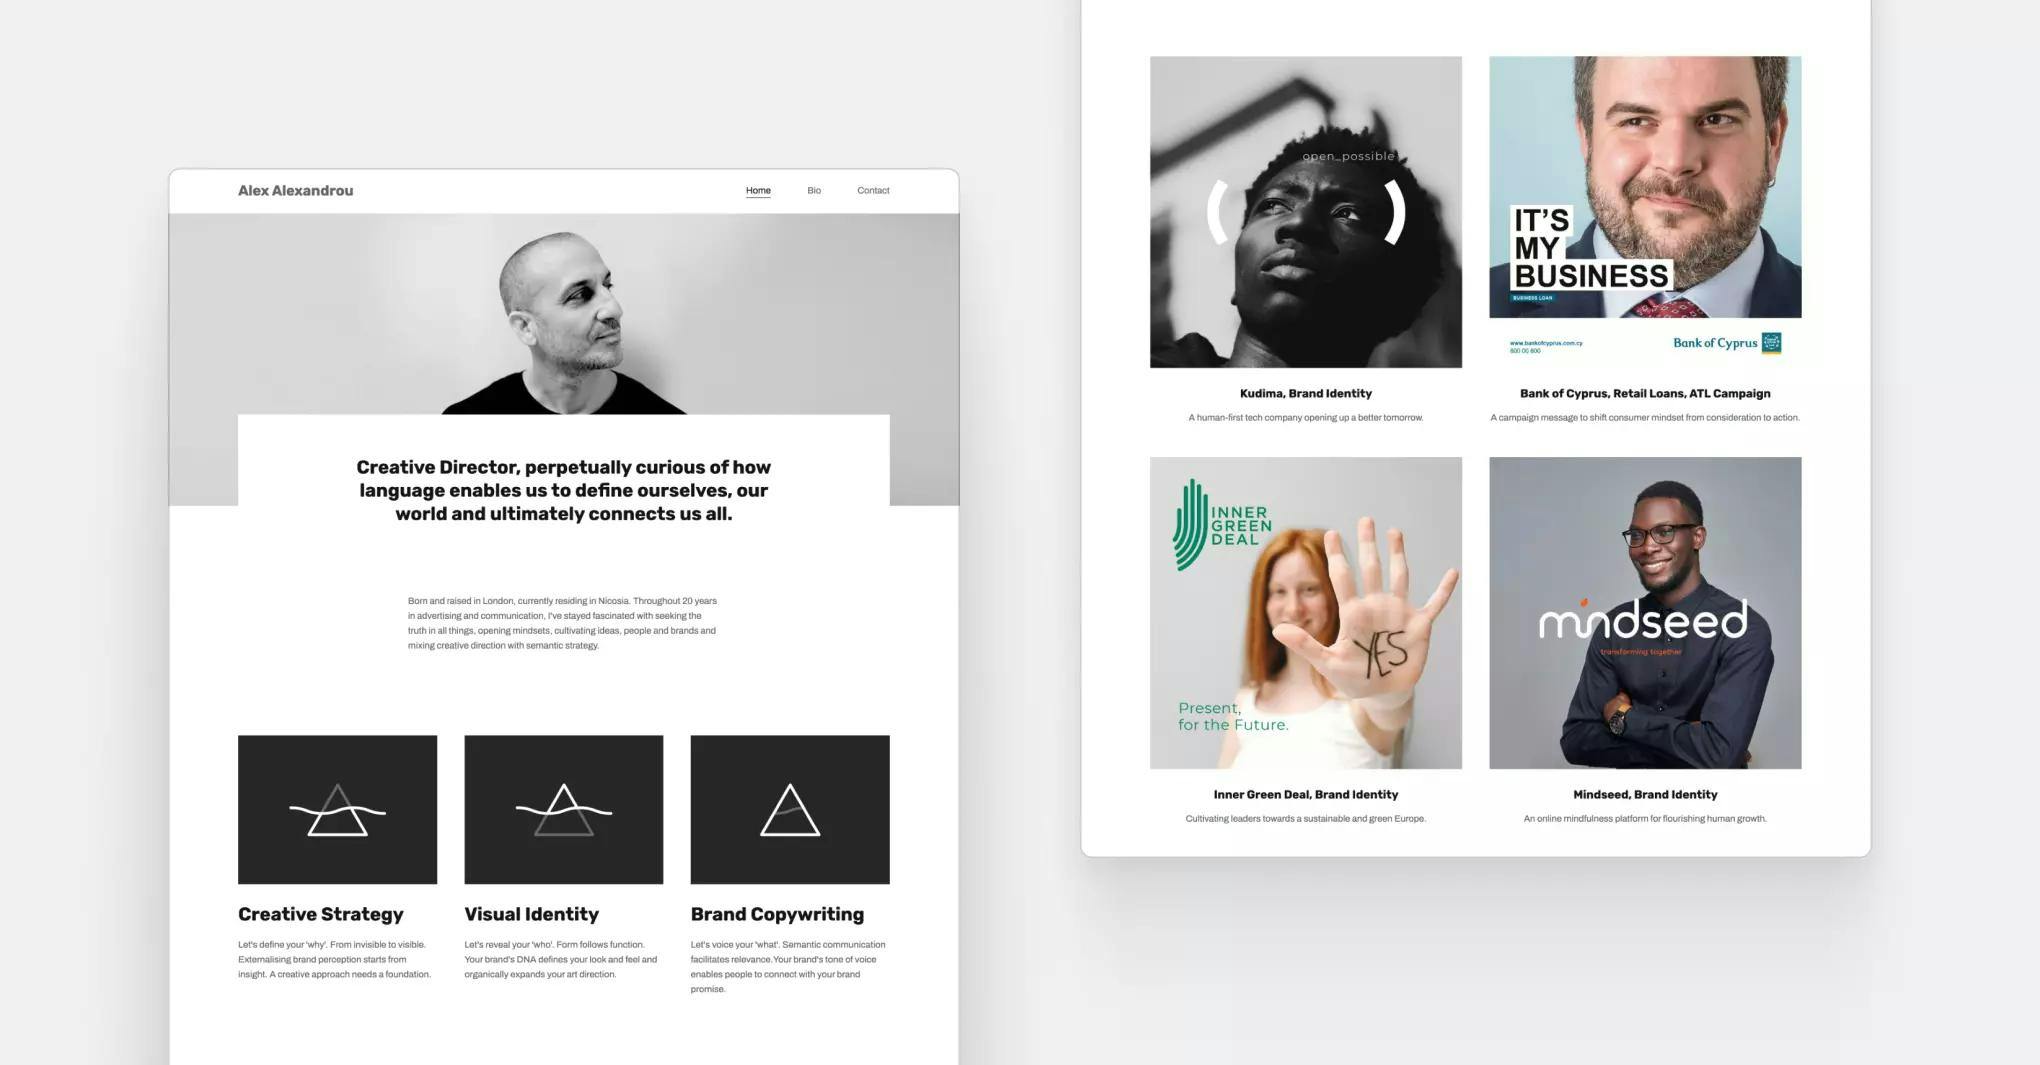 Alex Alexandrou's creative director portfolio homepage, featuring his areas of expertise and top projects.